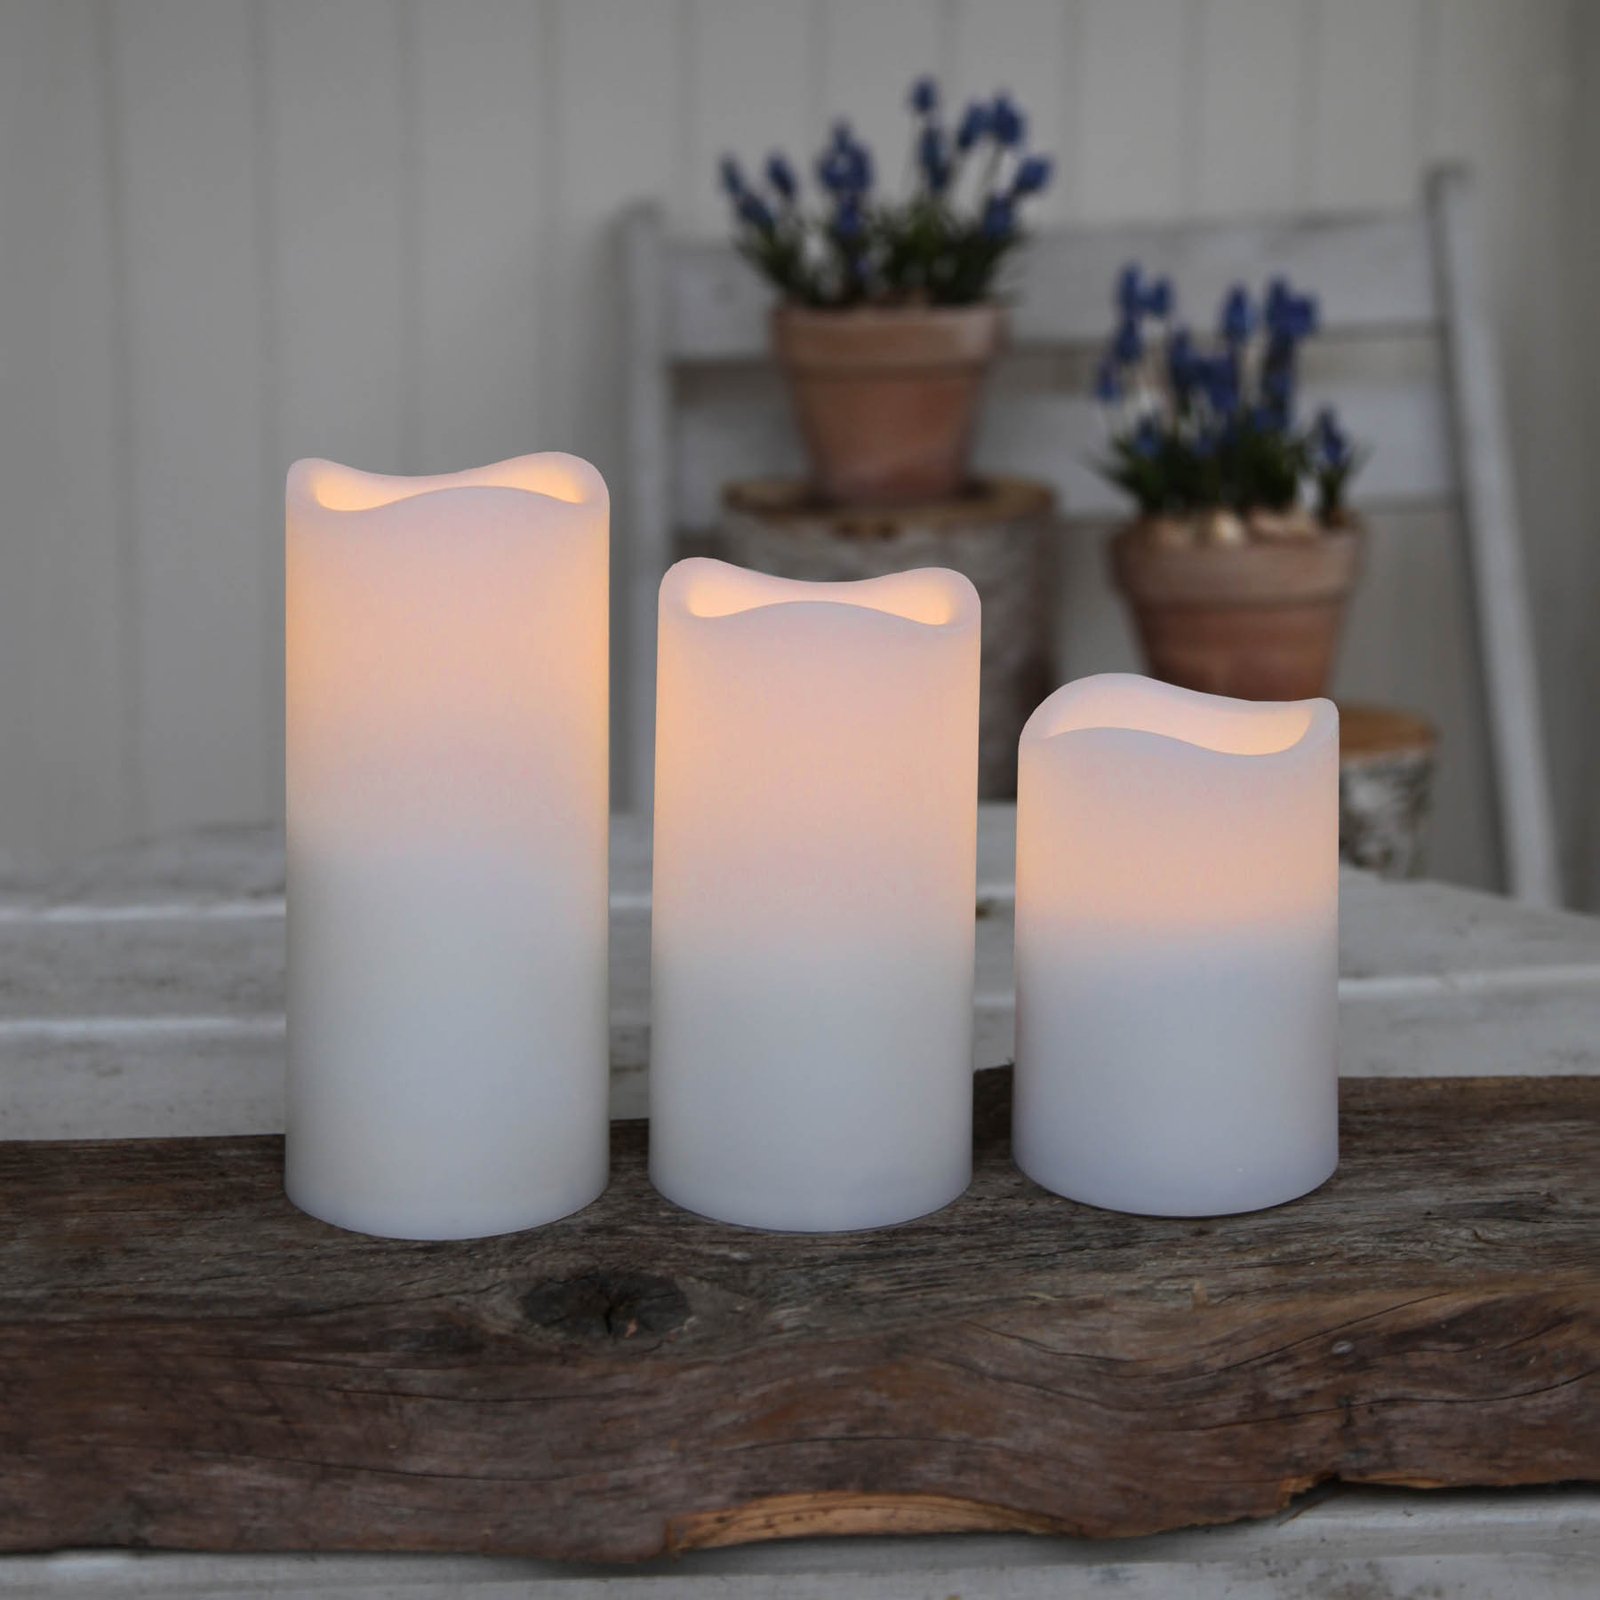 Set of three LED candles for outdoors